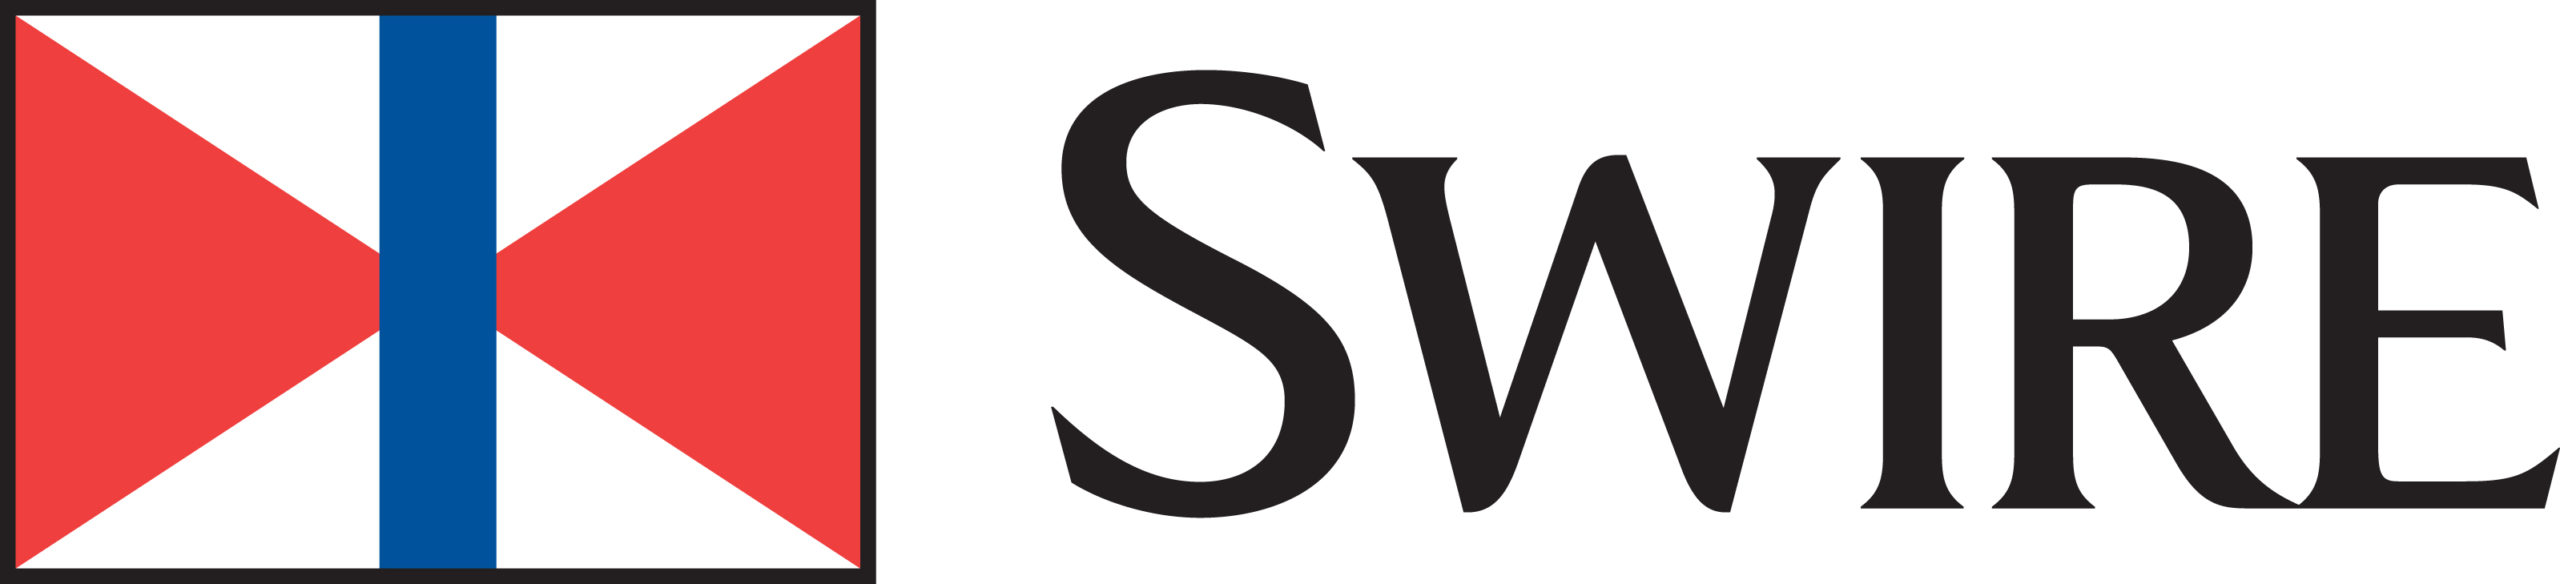 Swire Logo High Res